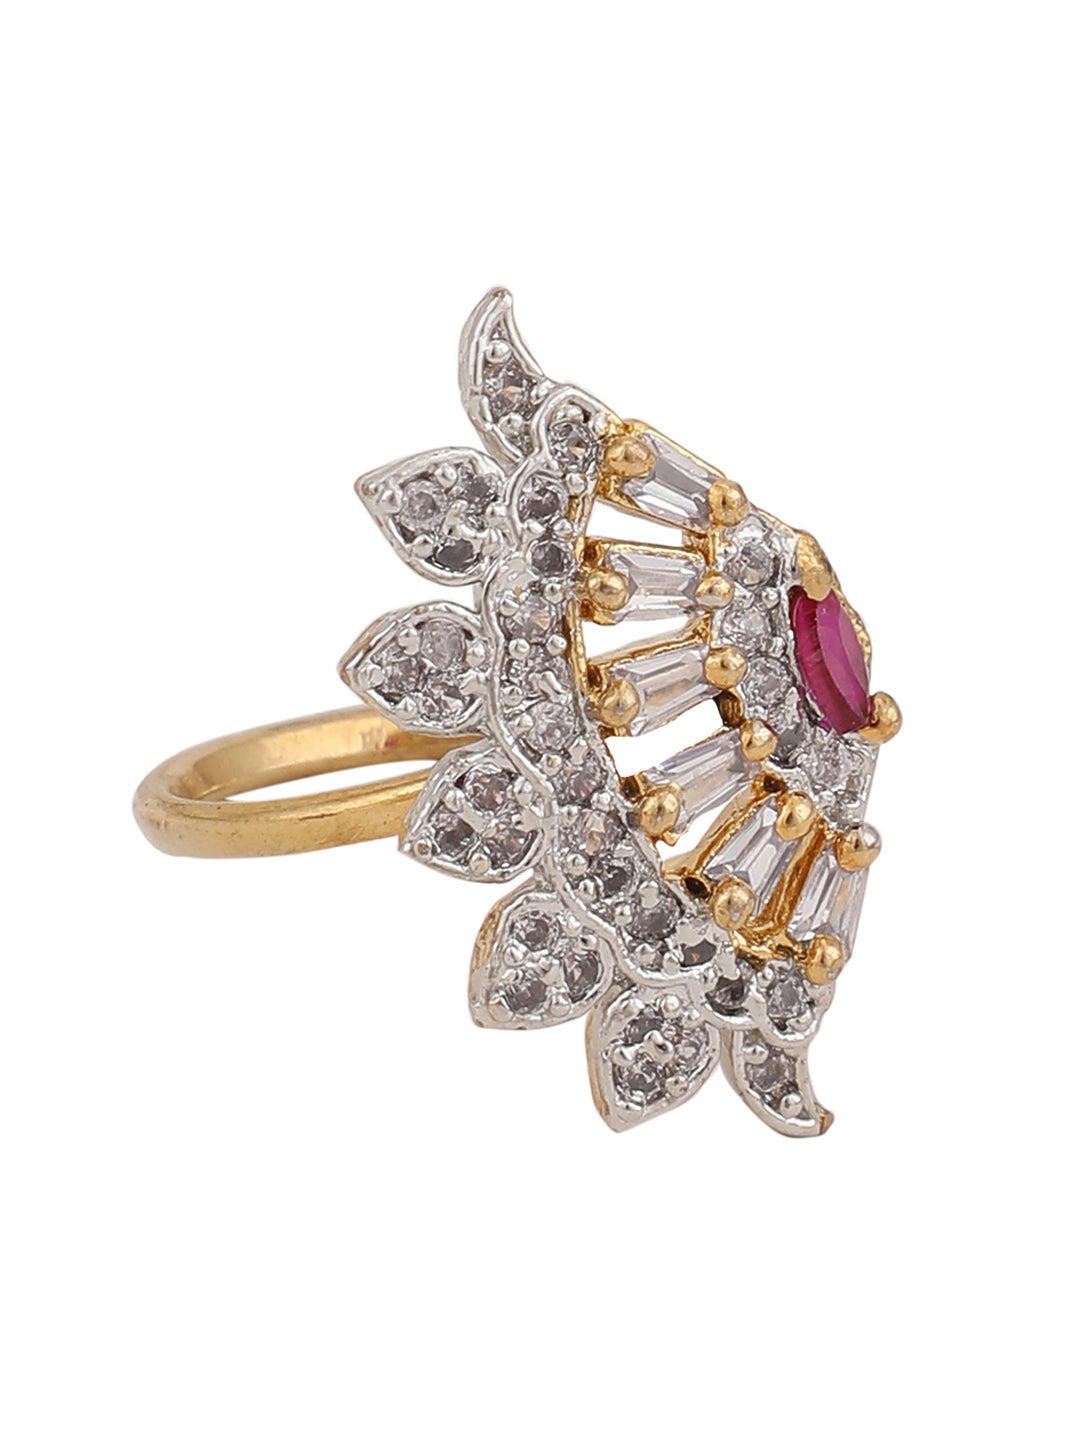 Women's Stylish Cubic Zirconia Studded Adjustable Gold-Plated Classy Ring - Anikas Creation